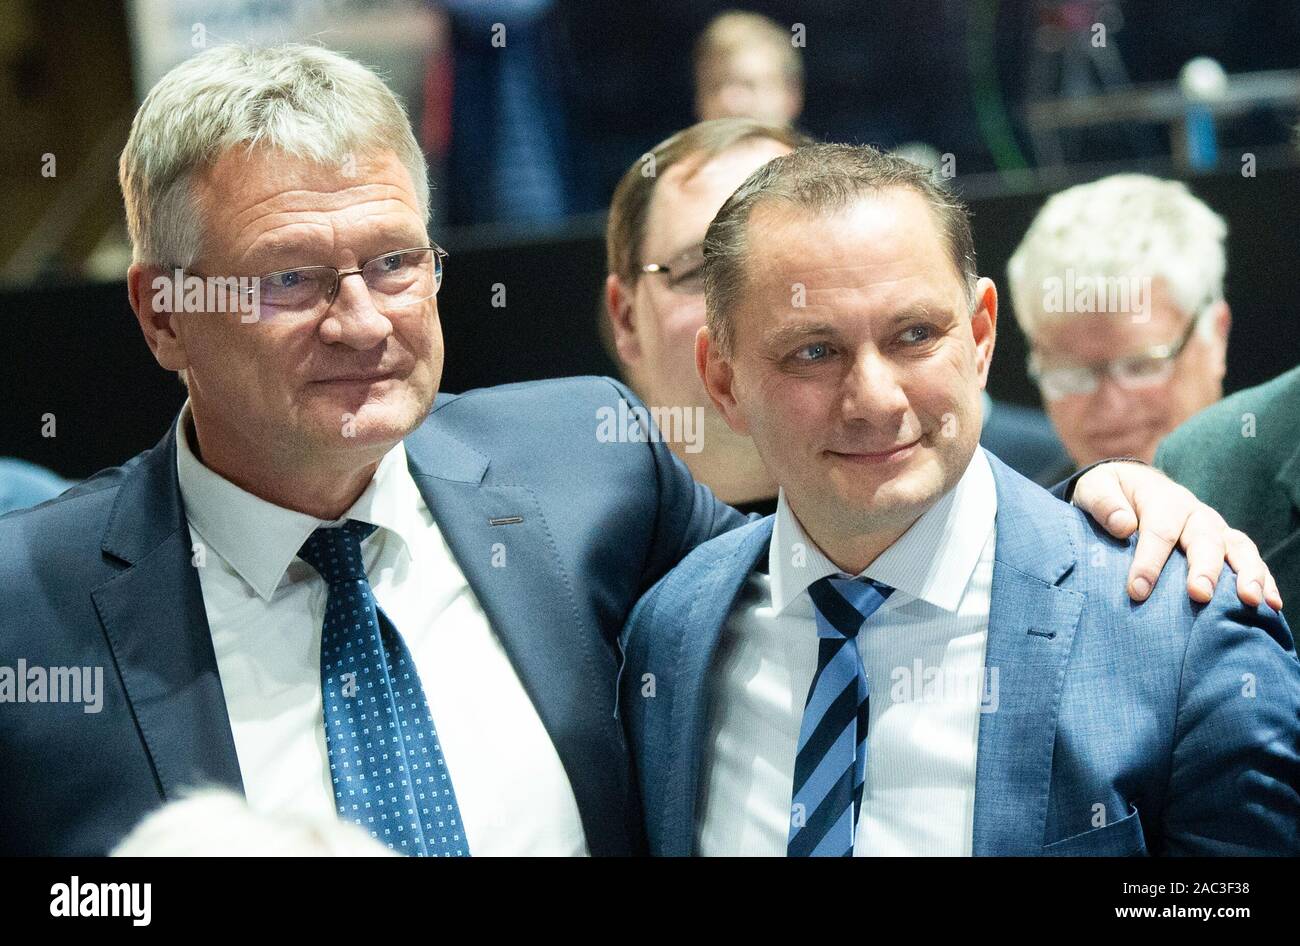 brunswick-germany-30th-nov-2019-jrg-meuthen-l-and-tino-chrupalla-newly-elected-federal-spokespersons-of-the-afd-are-standing-at-the-party-conference-of-the-afd-credit-hauke-christian-dittrichdpaalamy-live-news-2AC3F38.jpg